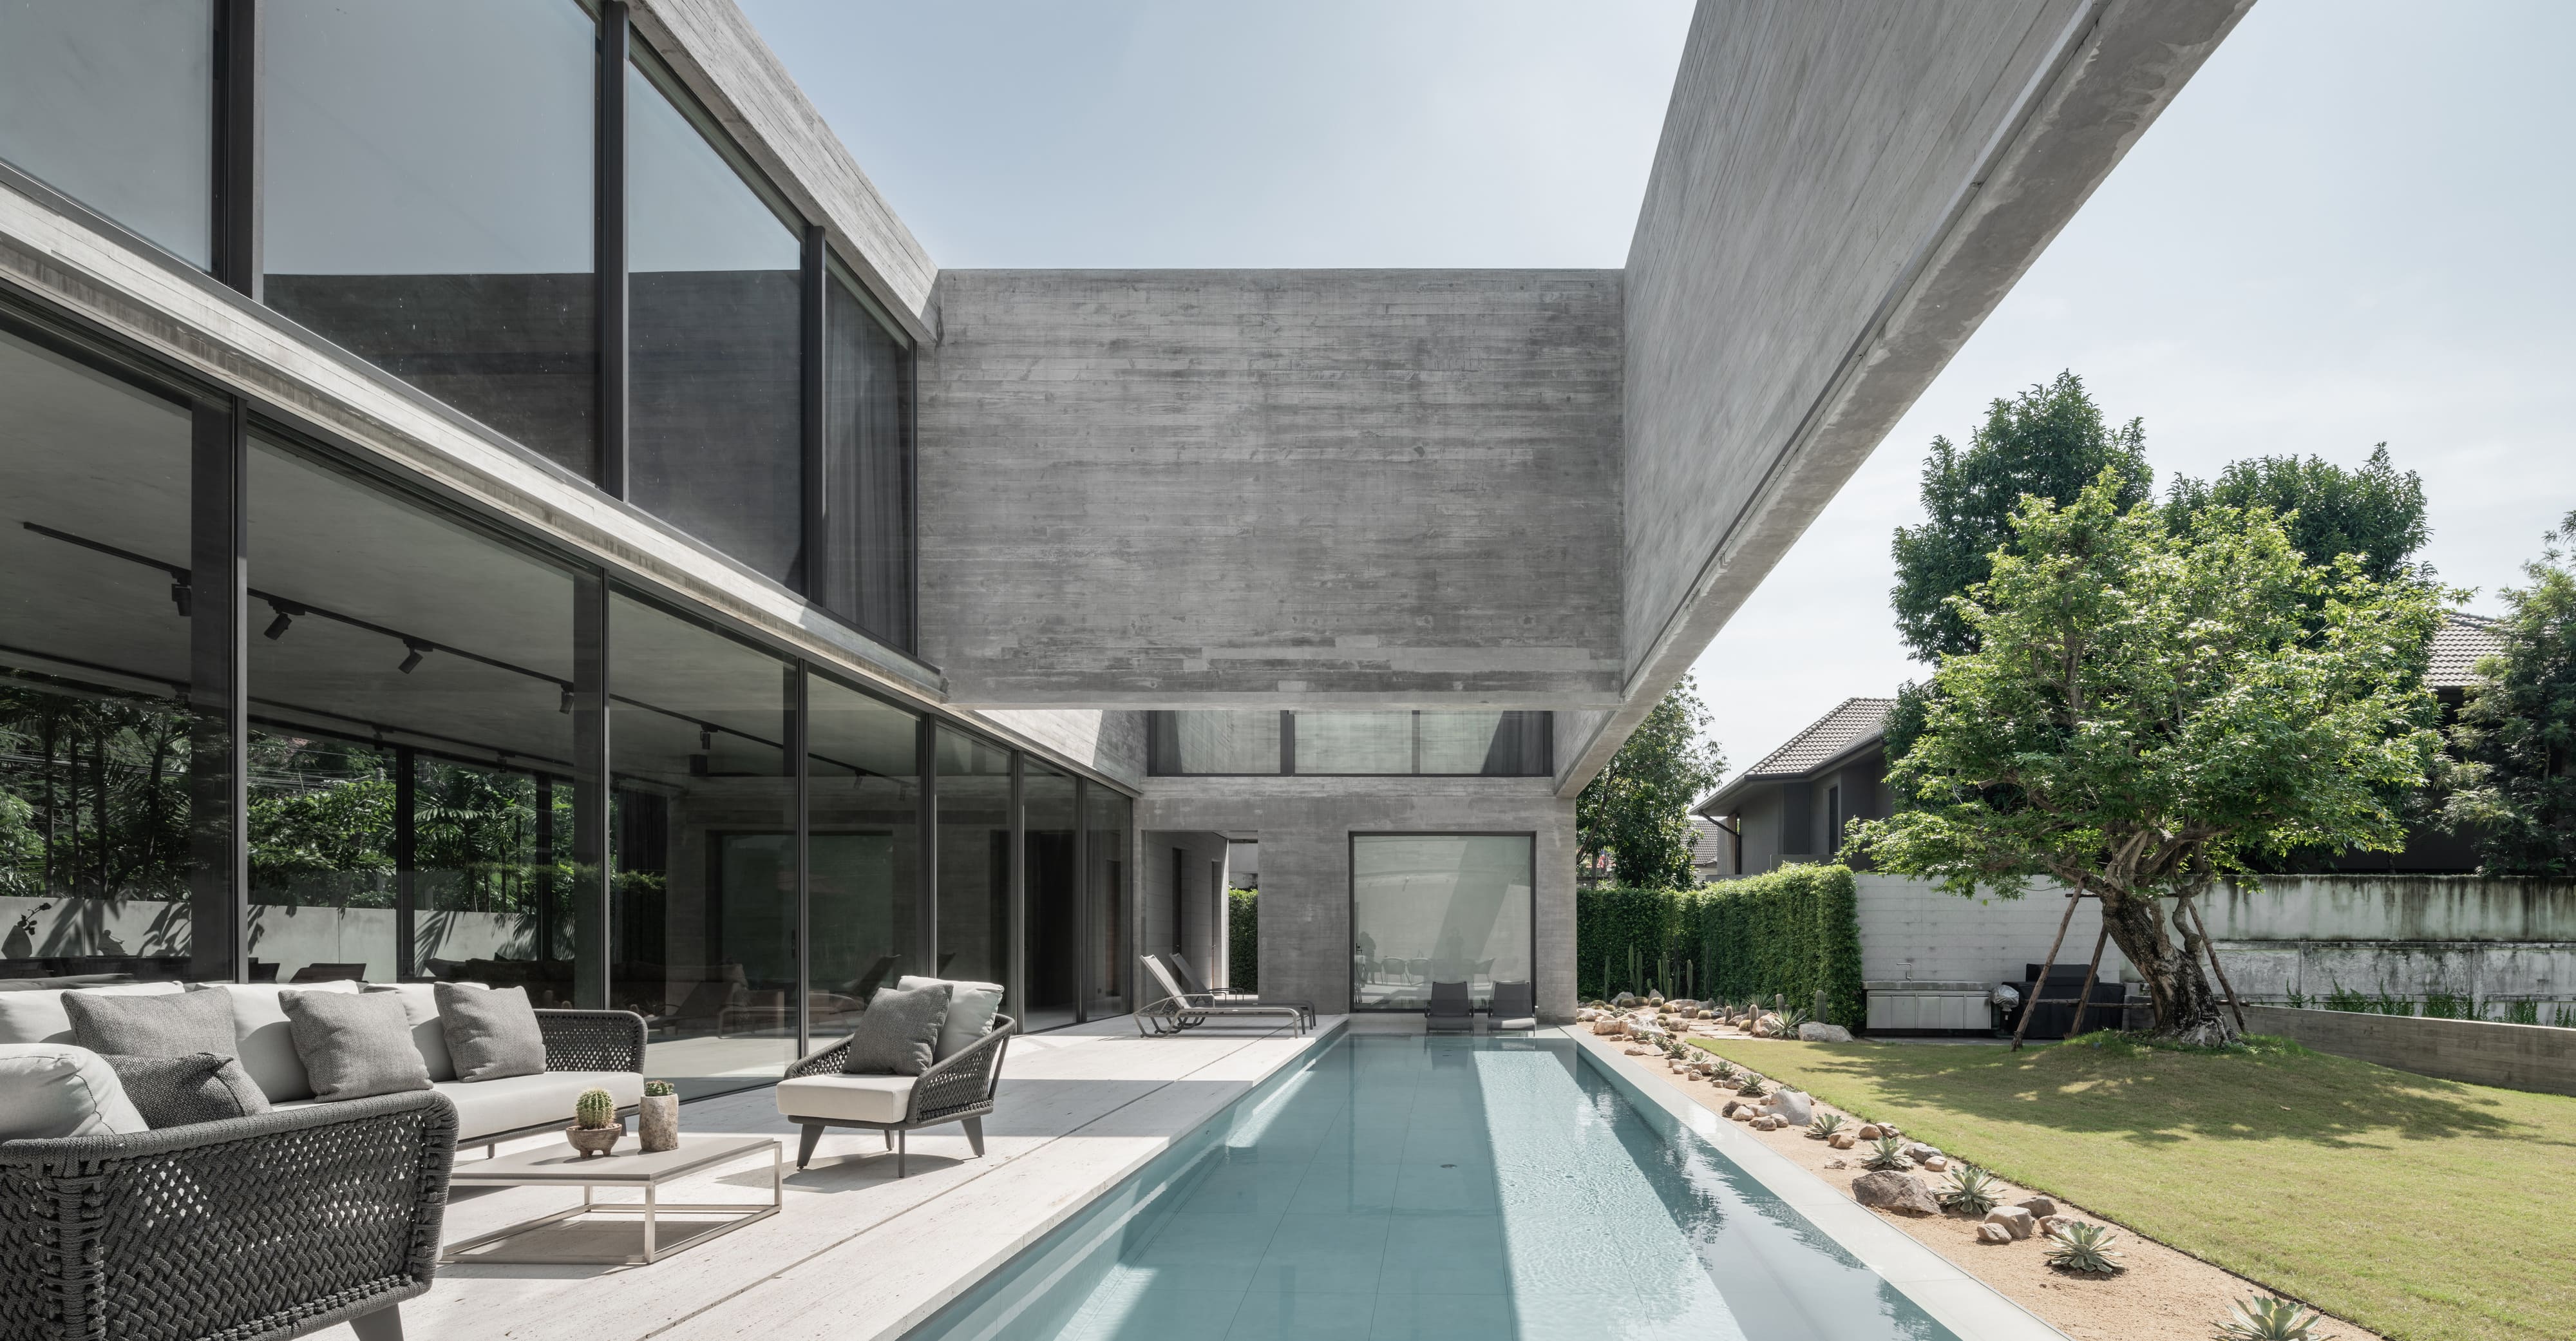 The series of exposed concrete planes on the Casa de Alisa design form a relationship with nature vertically